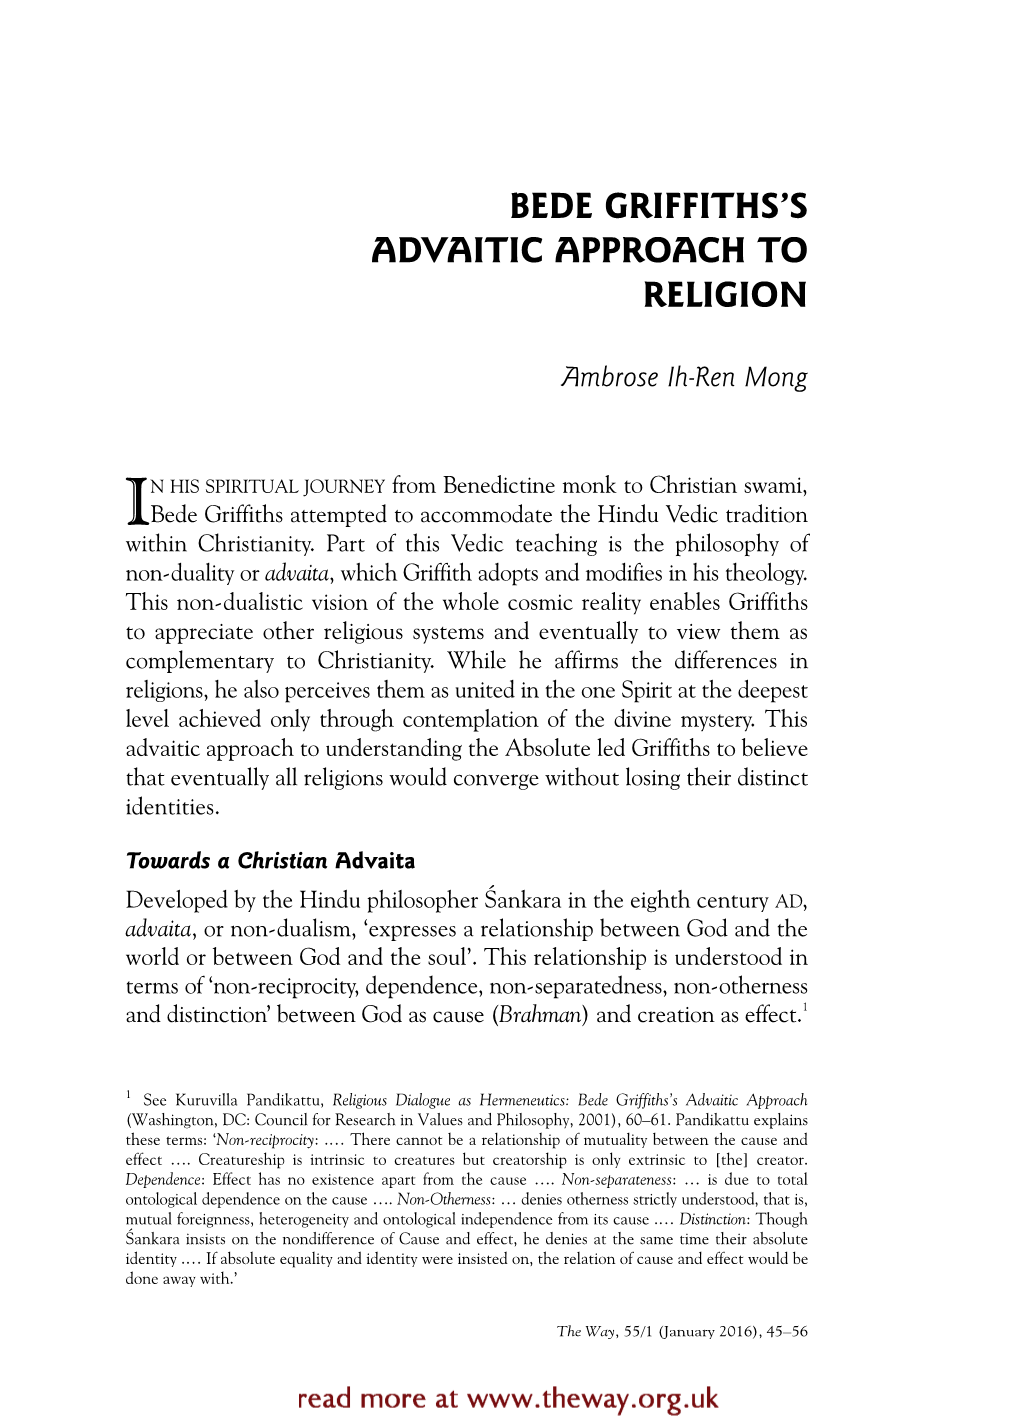 Bede Griffiths's Advaitic Approach to Religion